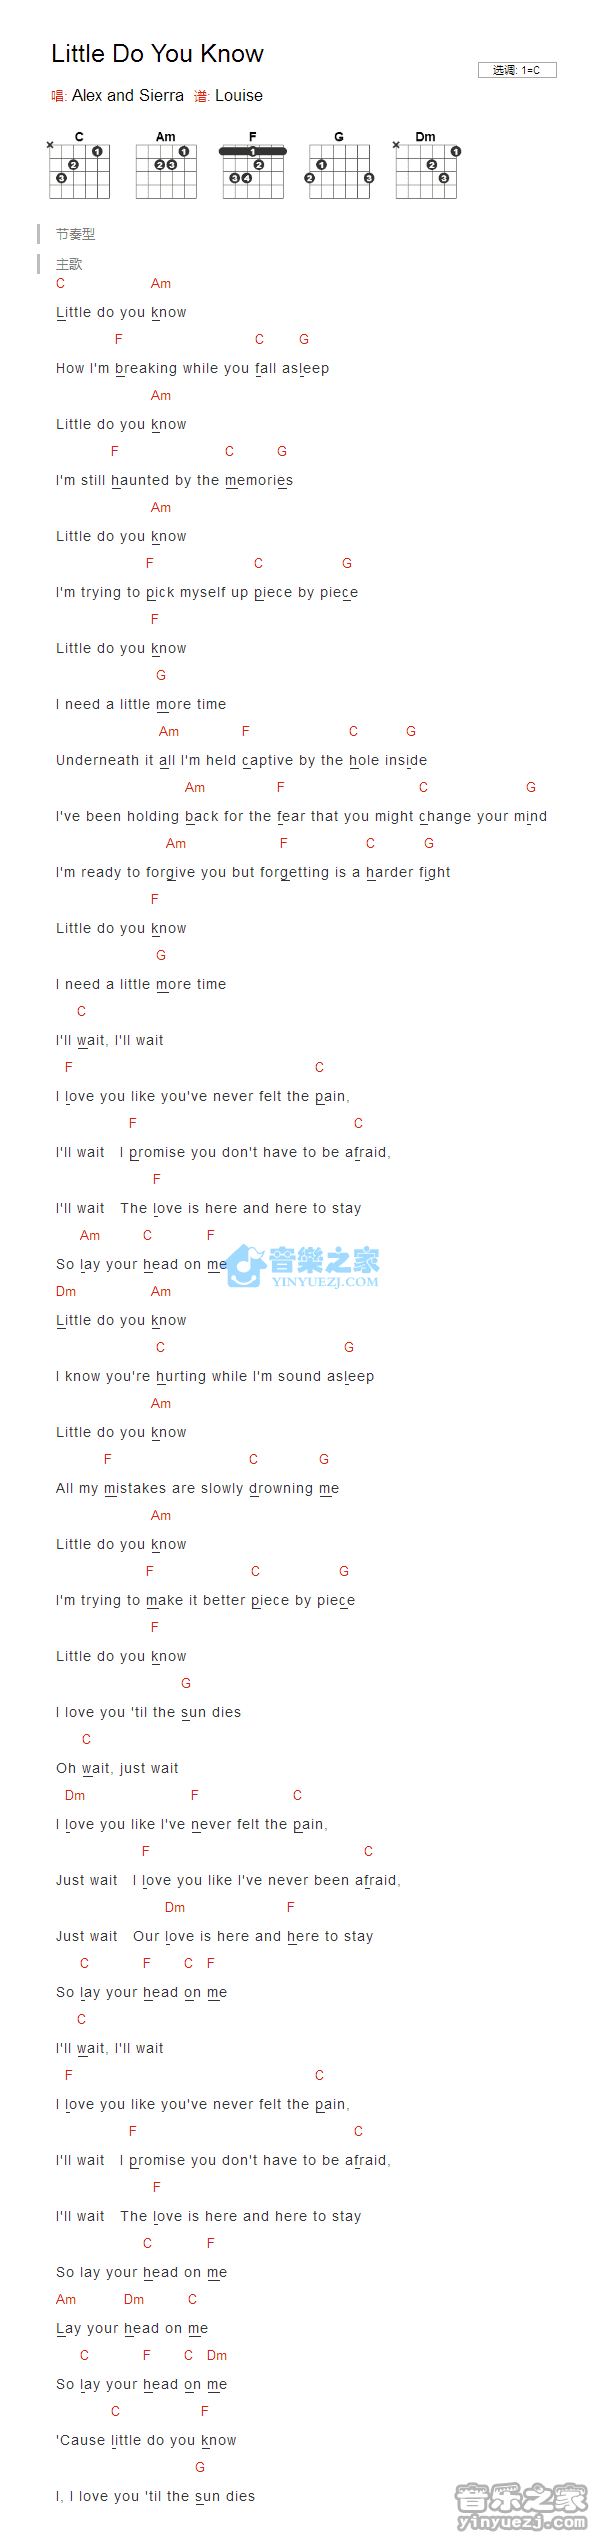 Little Do You Know_吉他谱_C调版_Alex and Sierra1